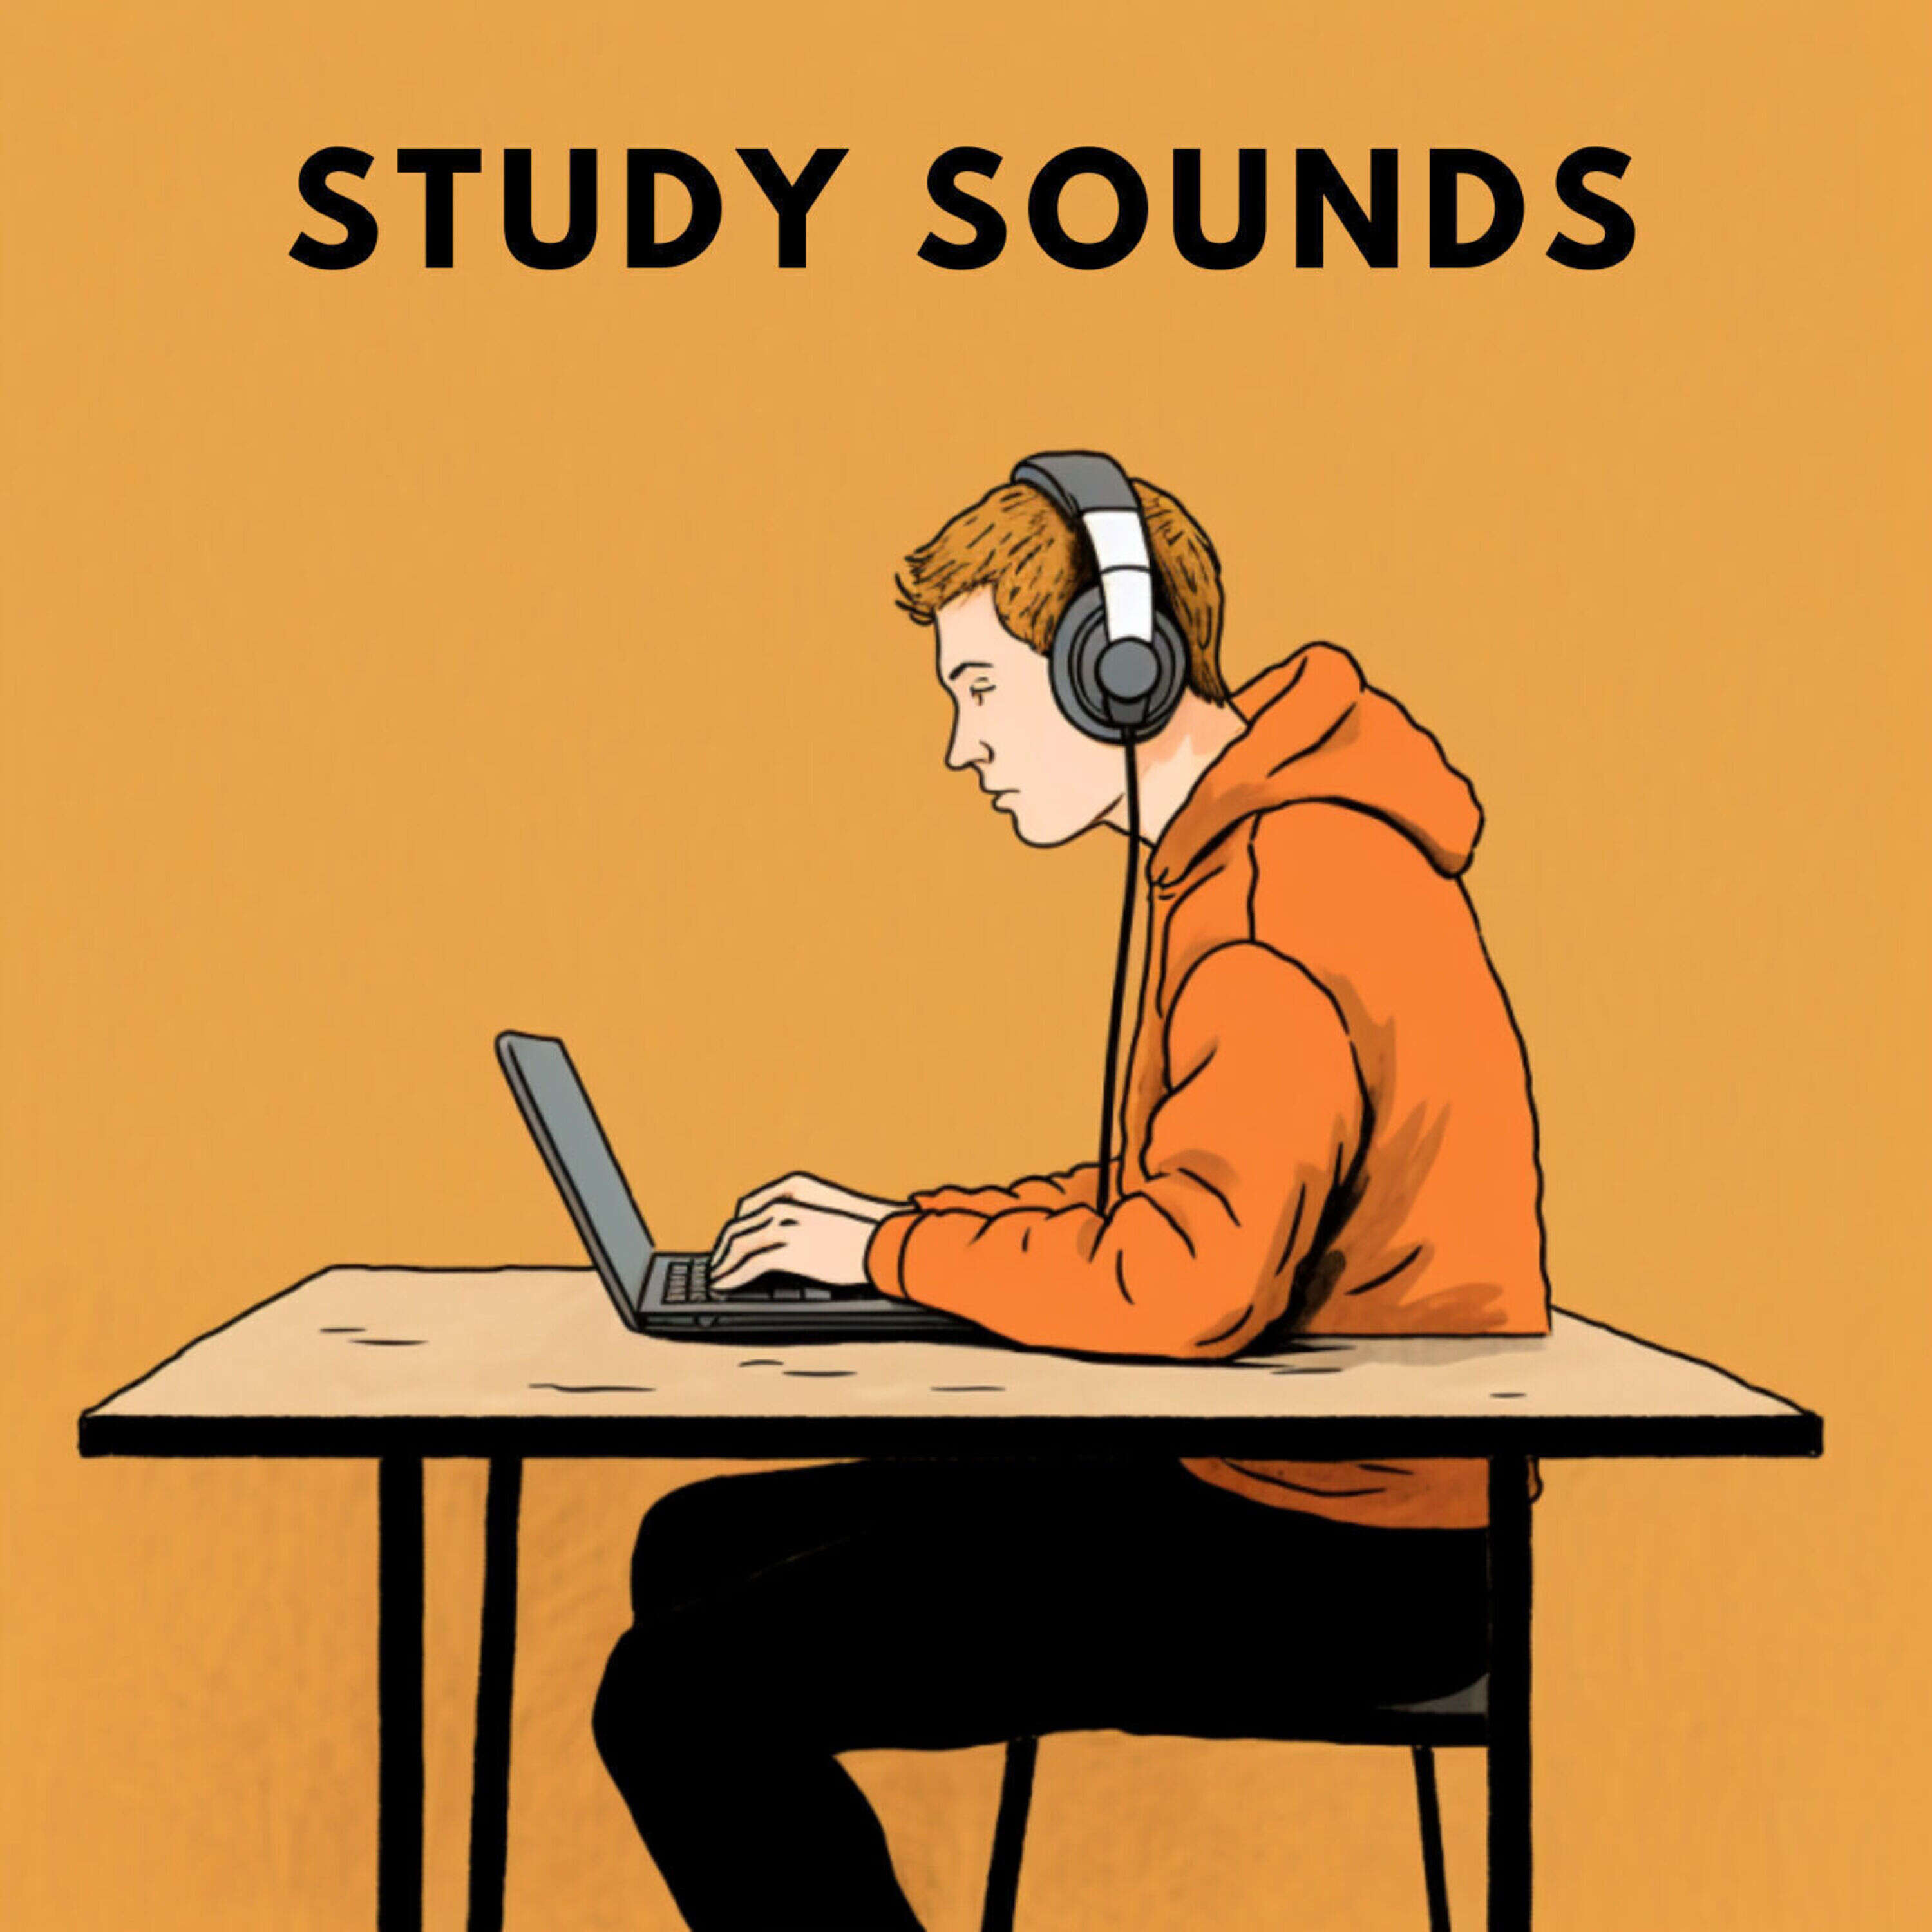 Relaxing Instrumental sounds For Study,Work,Relax - Cafe sounds - Background sounds